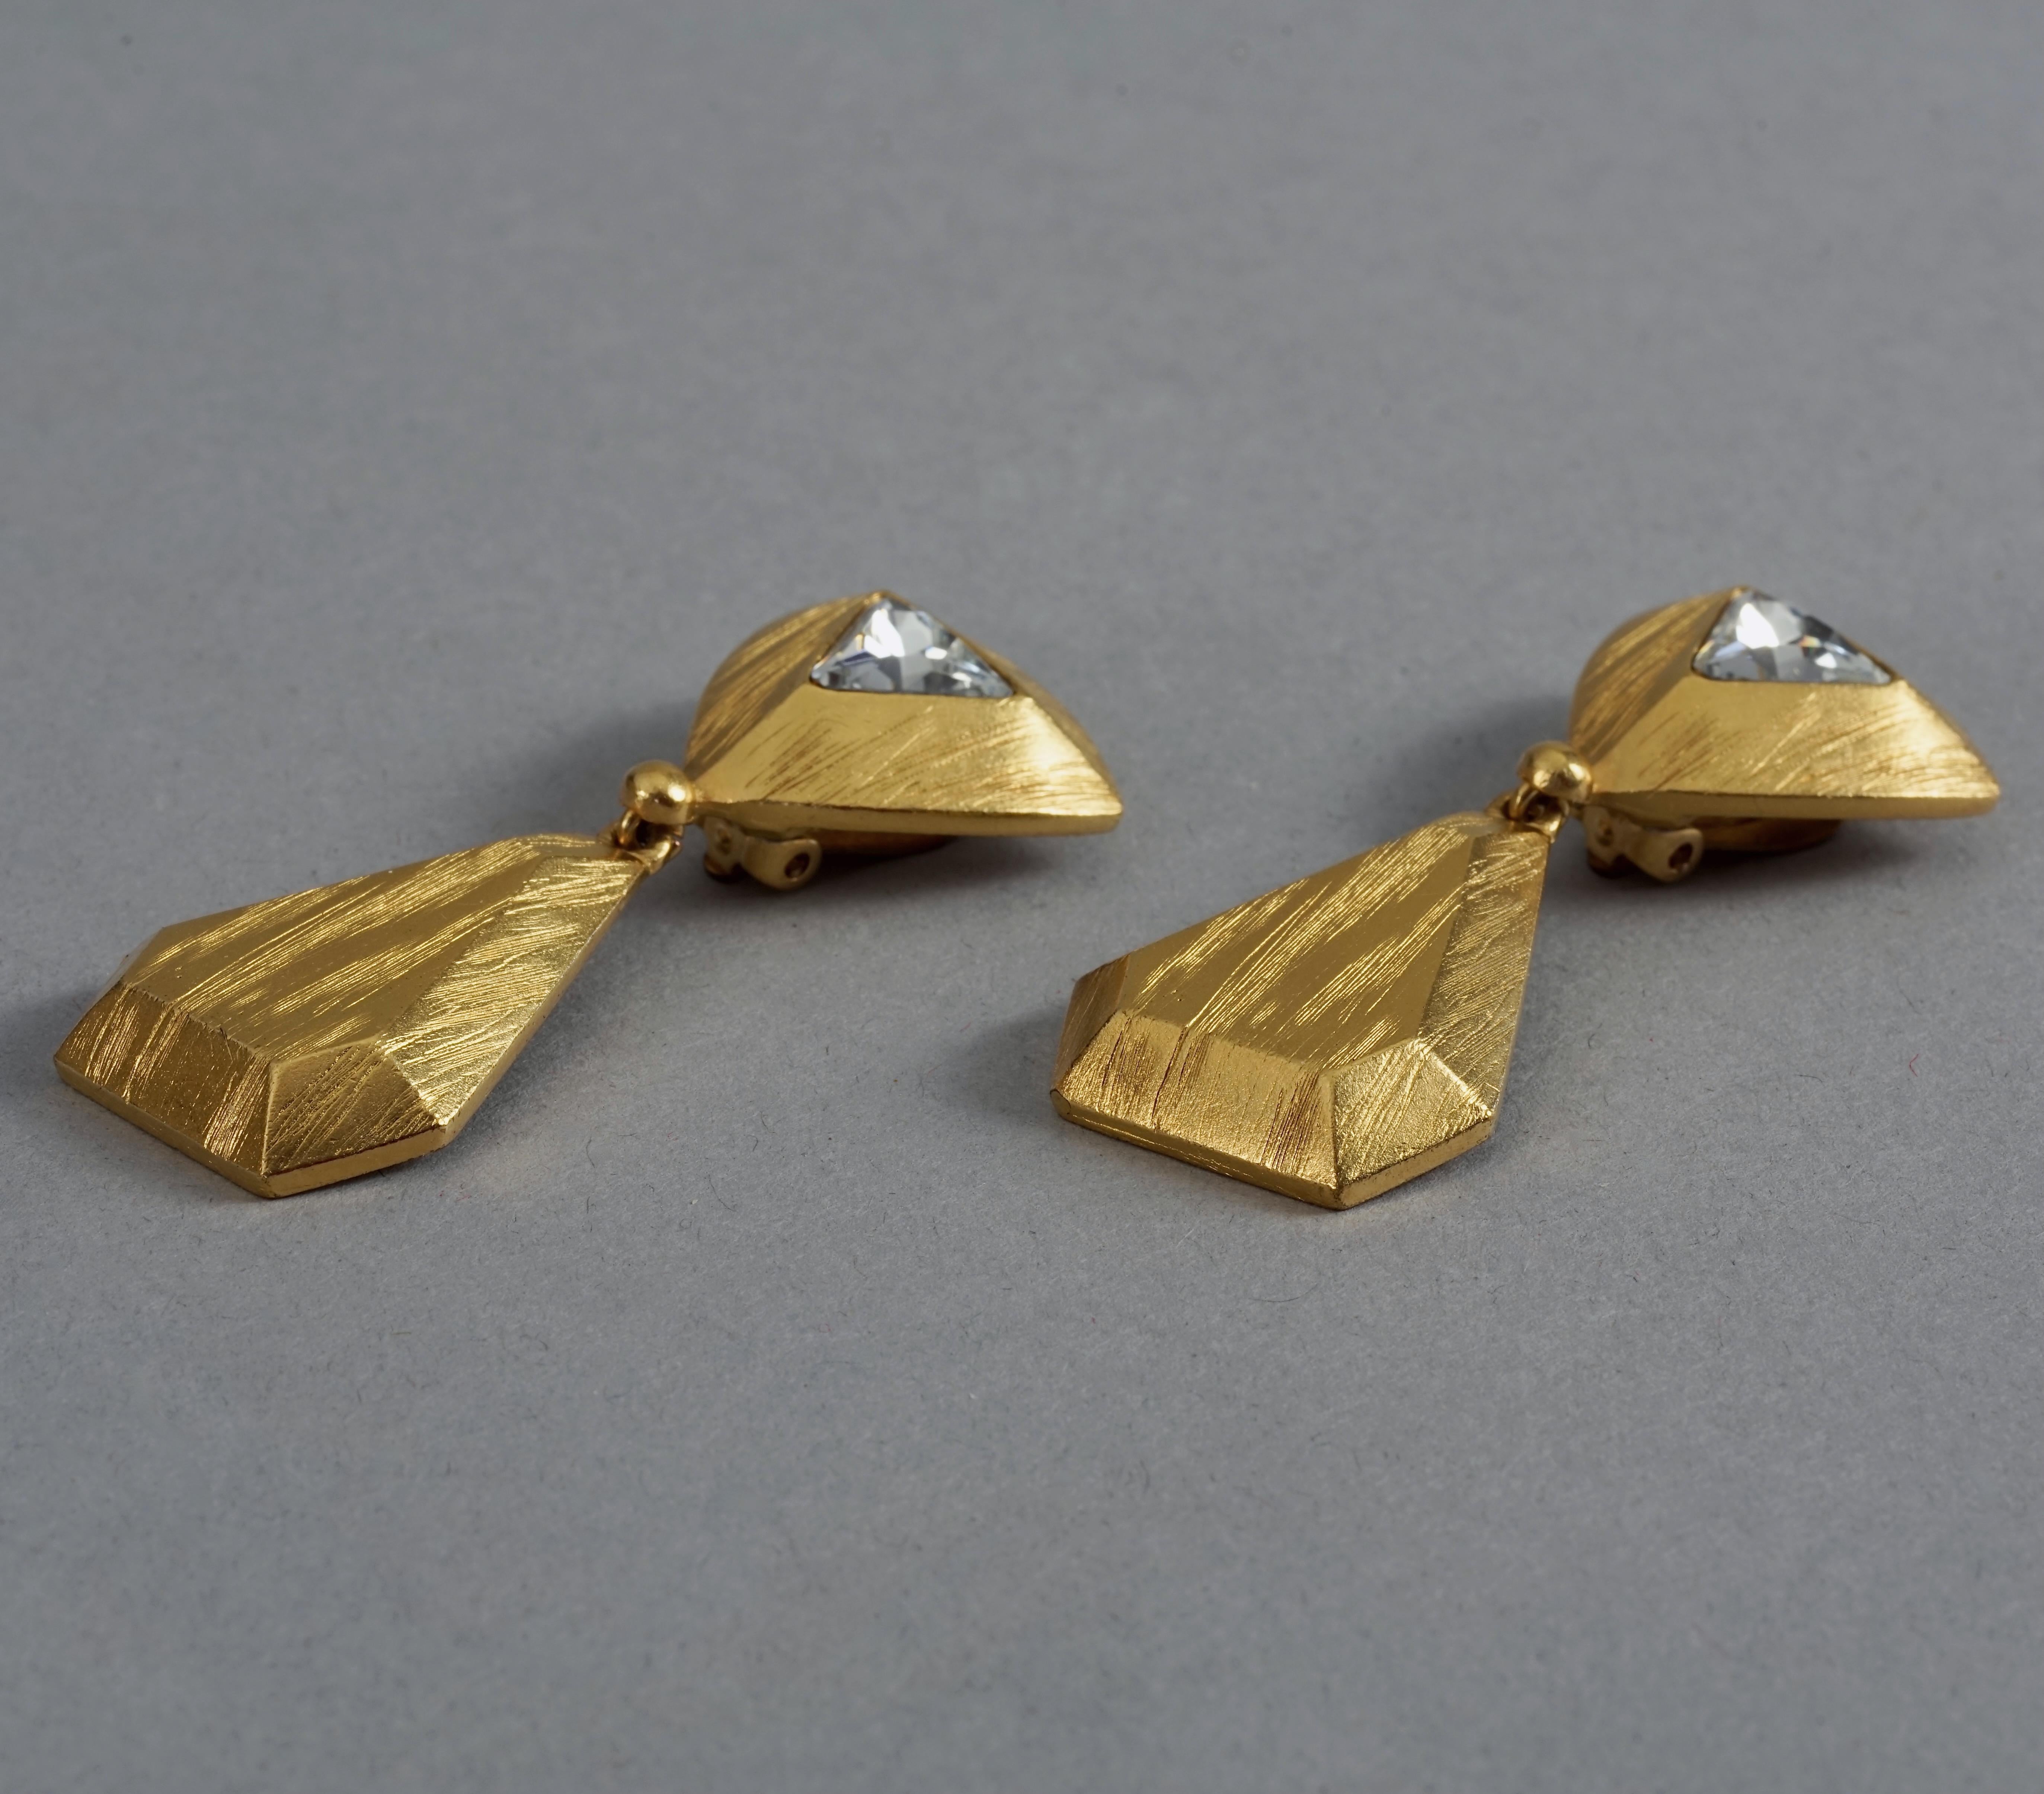 Vintage YVES SAINT LAURENT Ysl Rhinestone Geometric Textured Drop Earrings In Excellent Condition For Sale In Kingersheim, Alsace